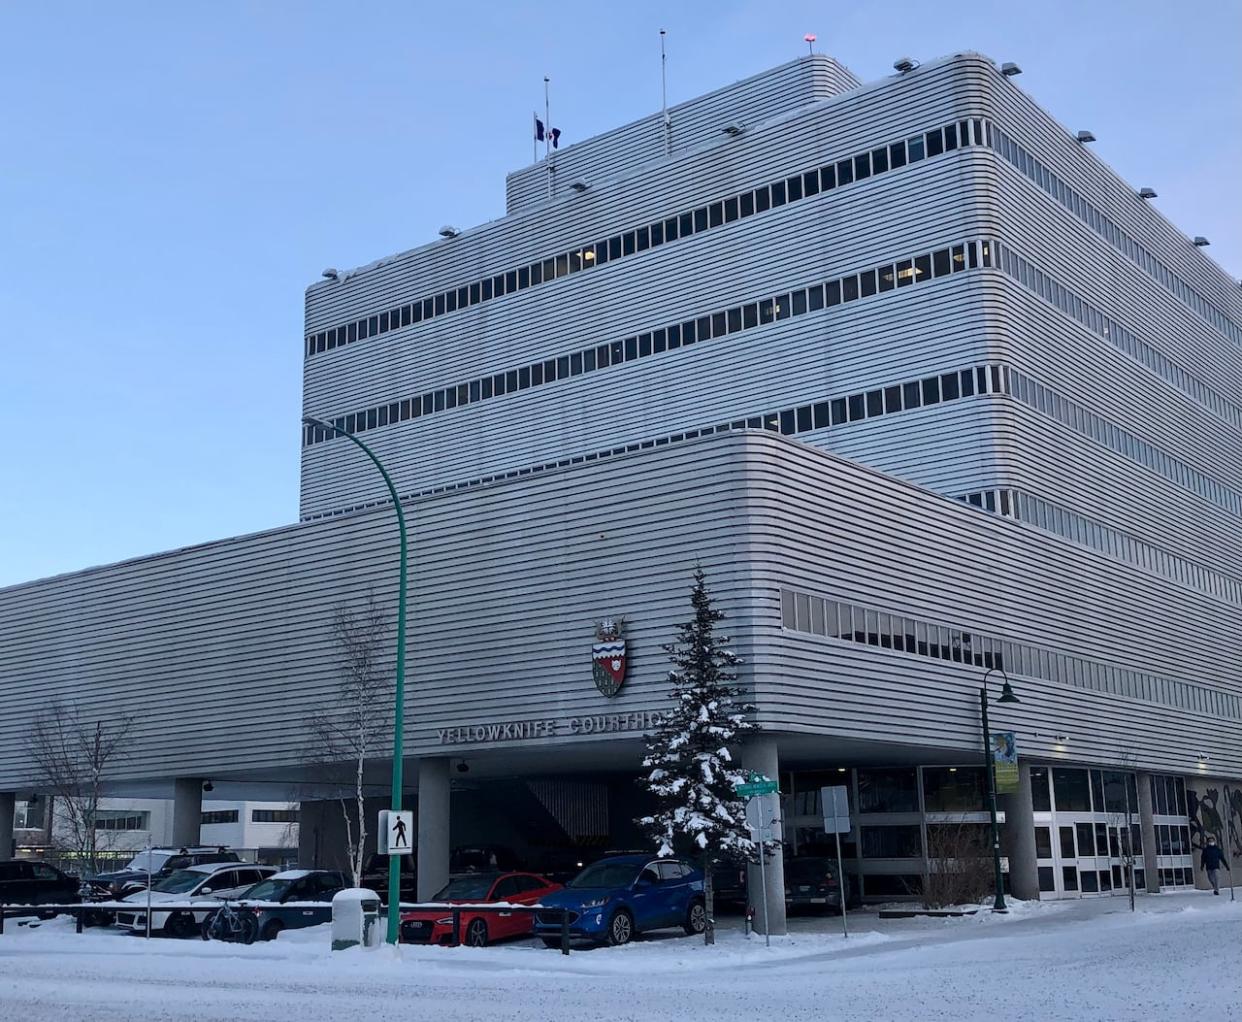 The courthouse in Yellowknife. (Natalie Pressman/CBC - image credit)